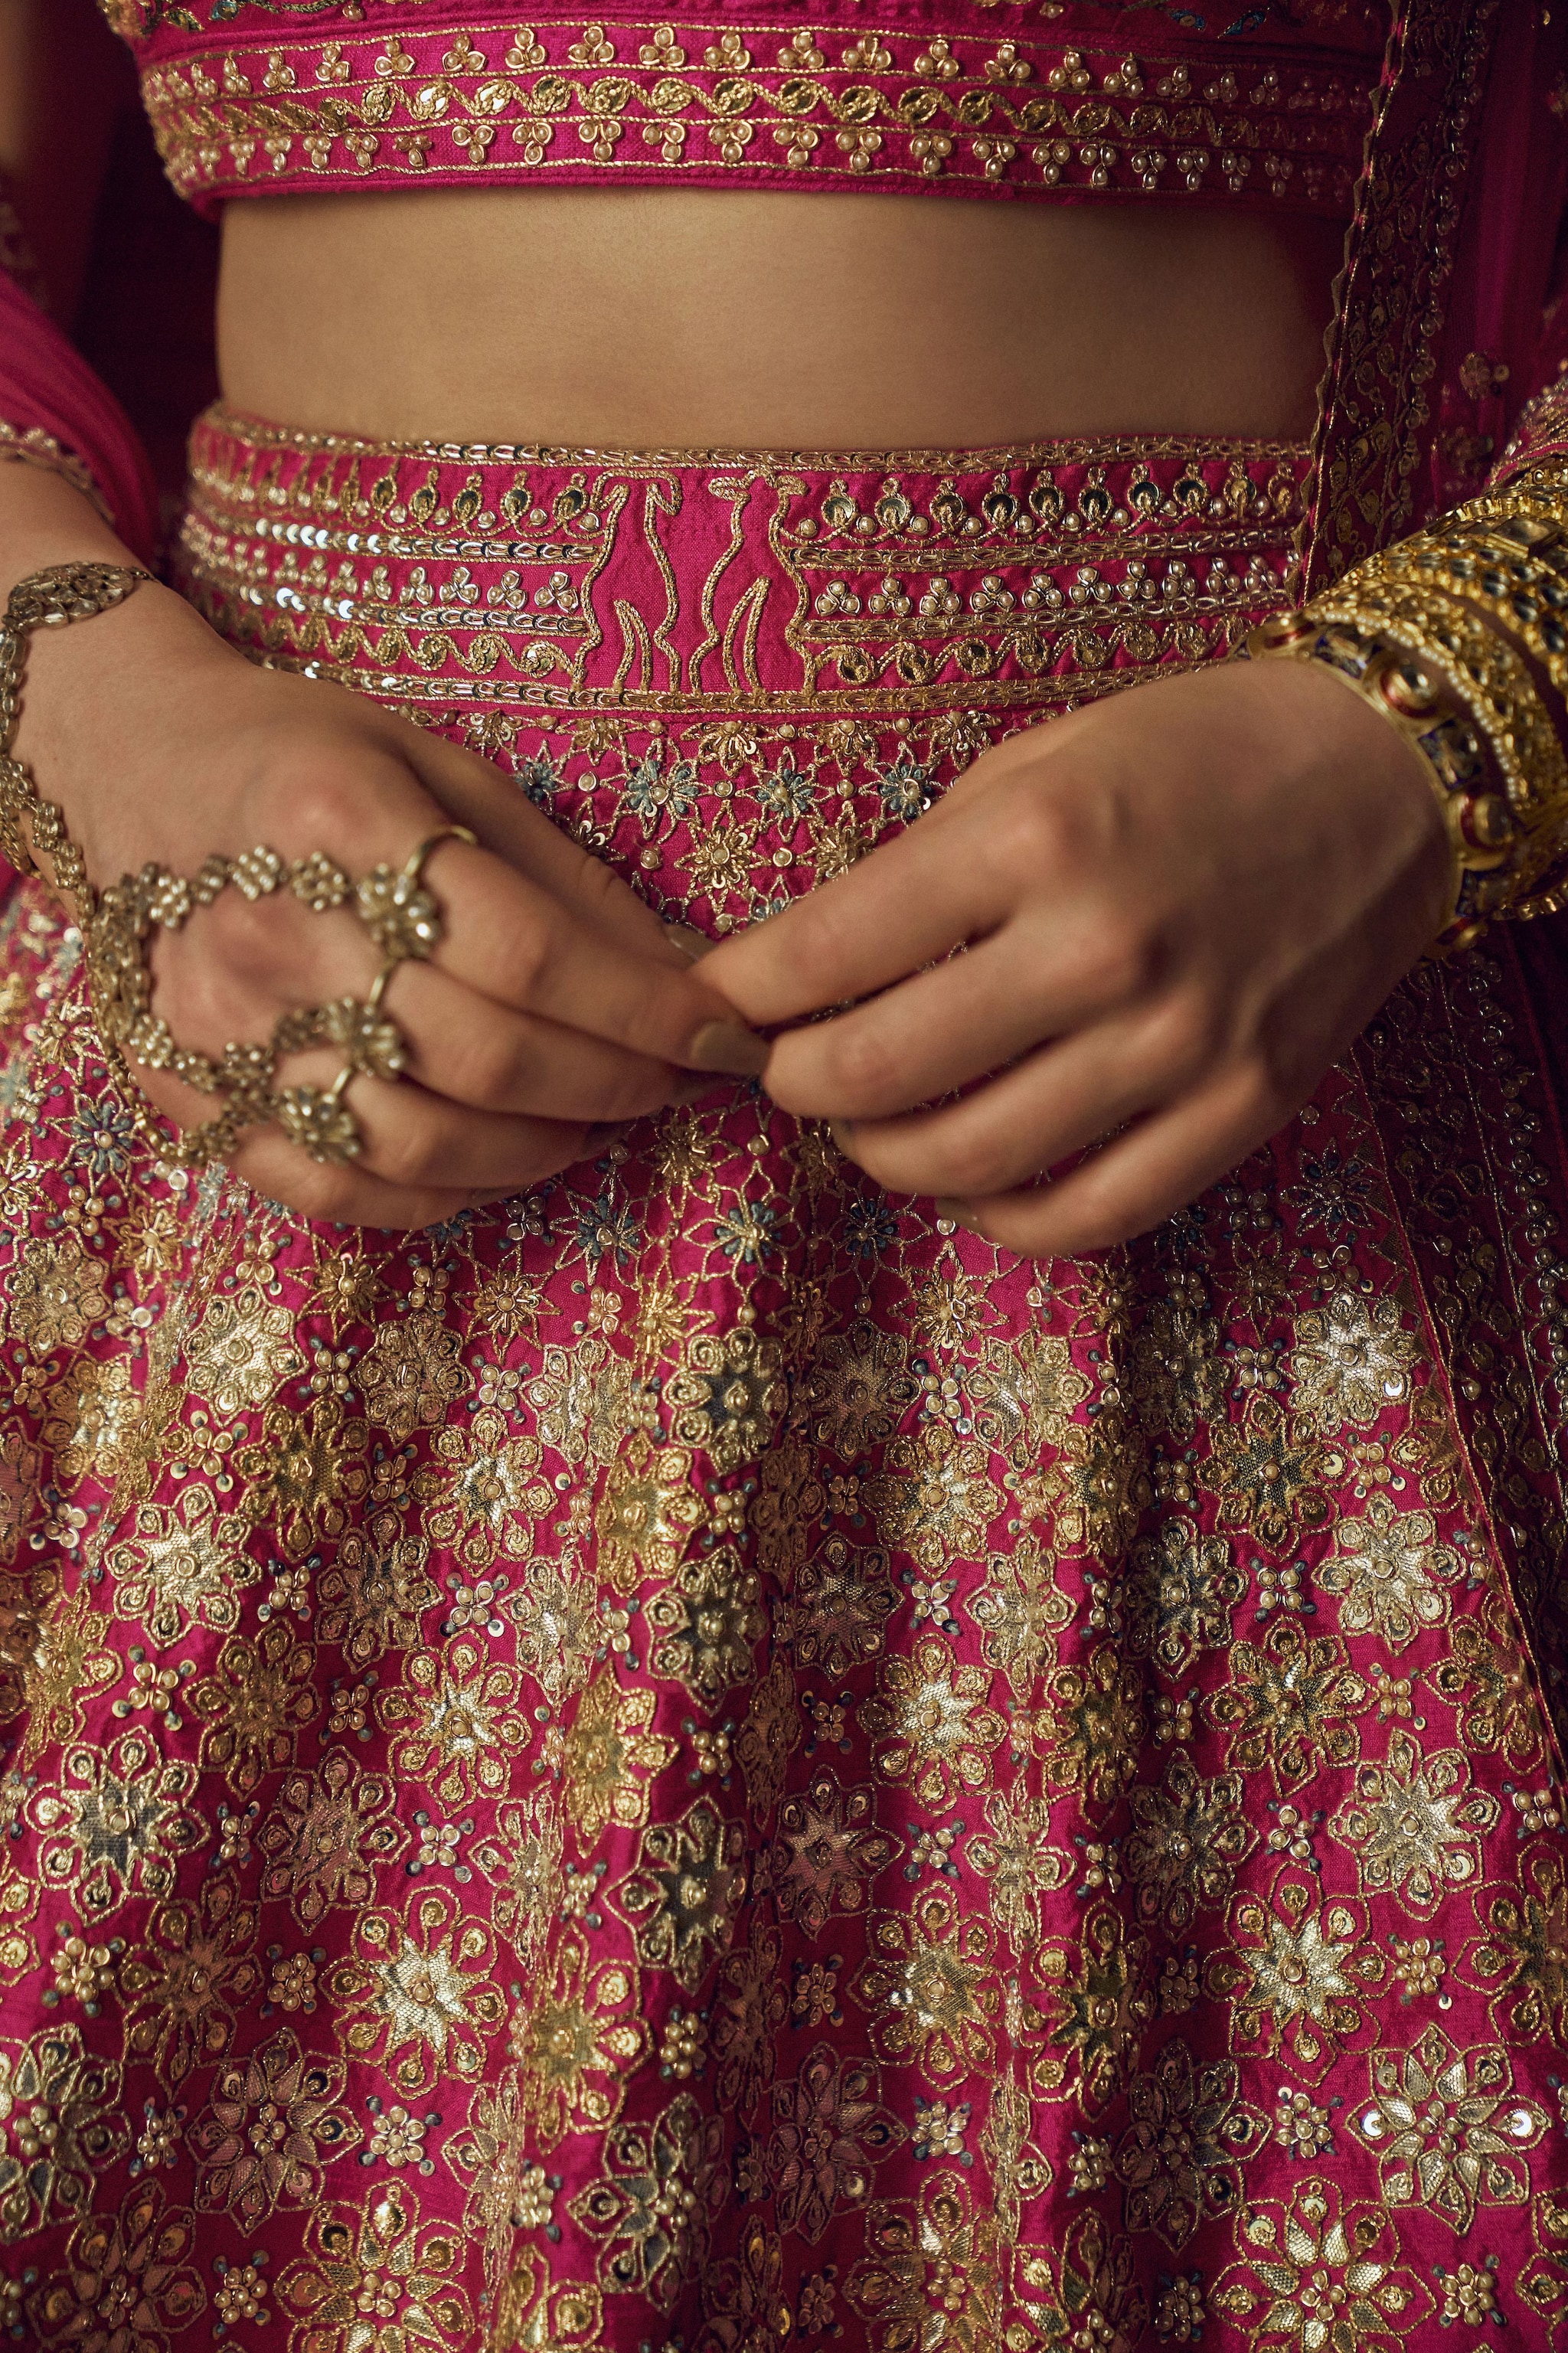 The lehenga was hand embroidered on raw silk and was adorned with gotta patti and sequins